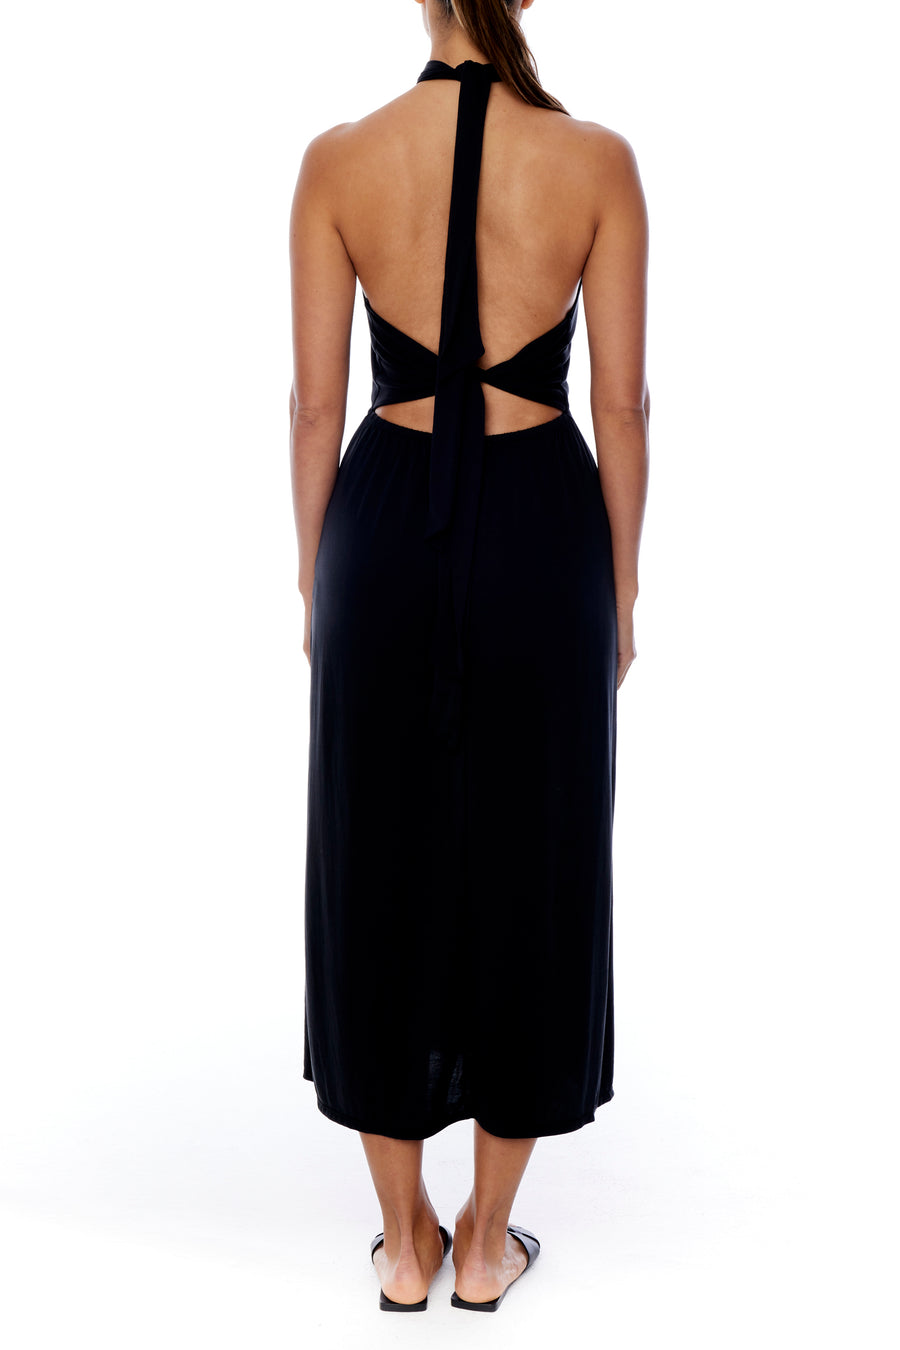 midi halter dress, front keyhole, elasticized waist, open back with lower back tie and side slit